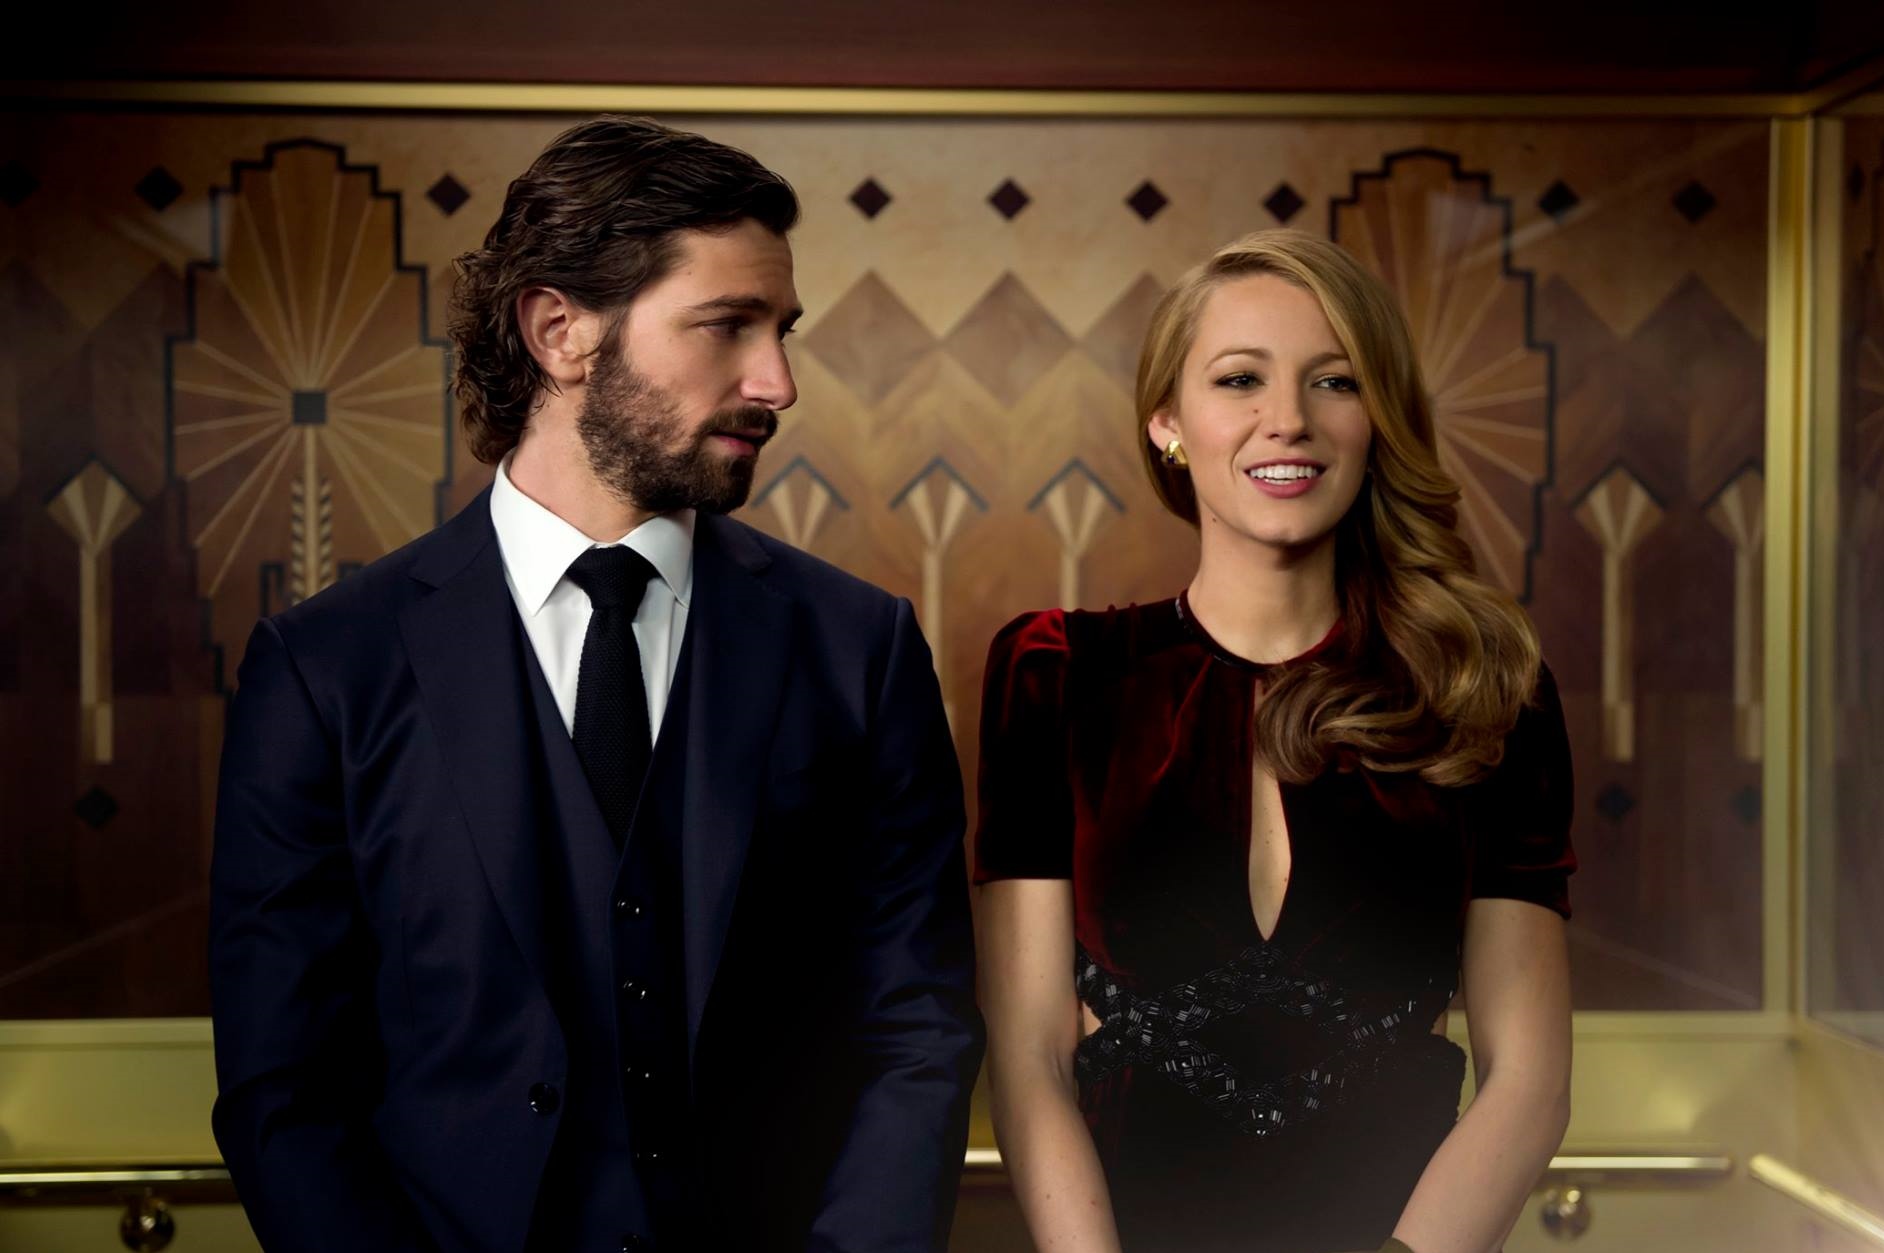 THE AGE OF ADALINE Leaves Viewers With Good and Bad Memories